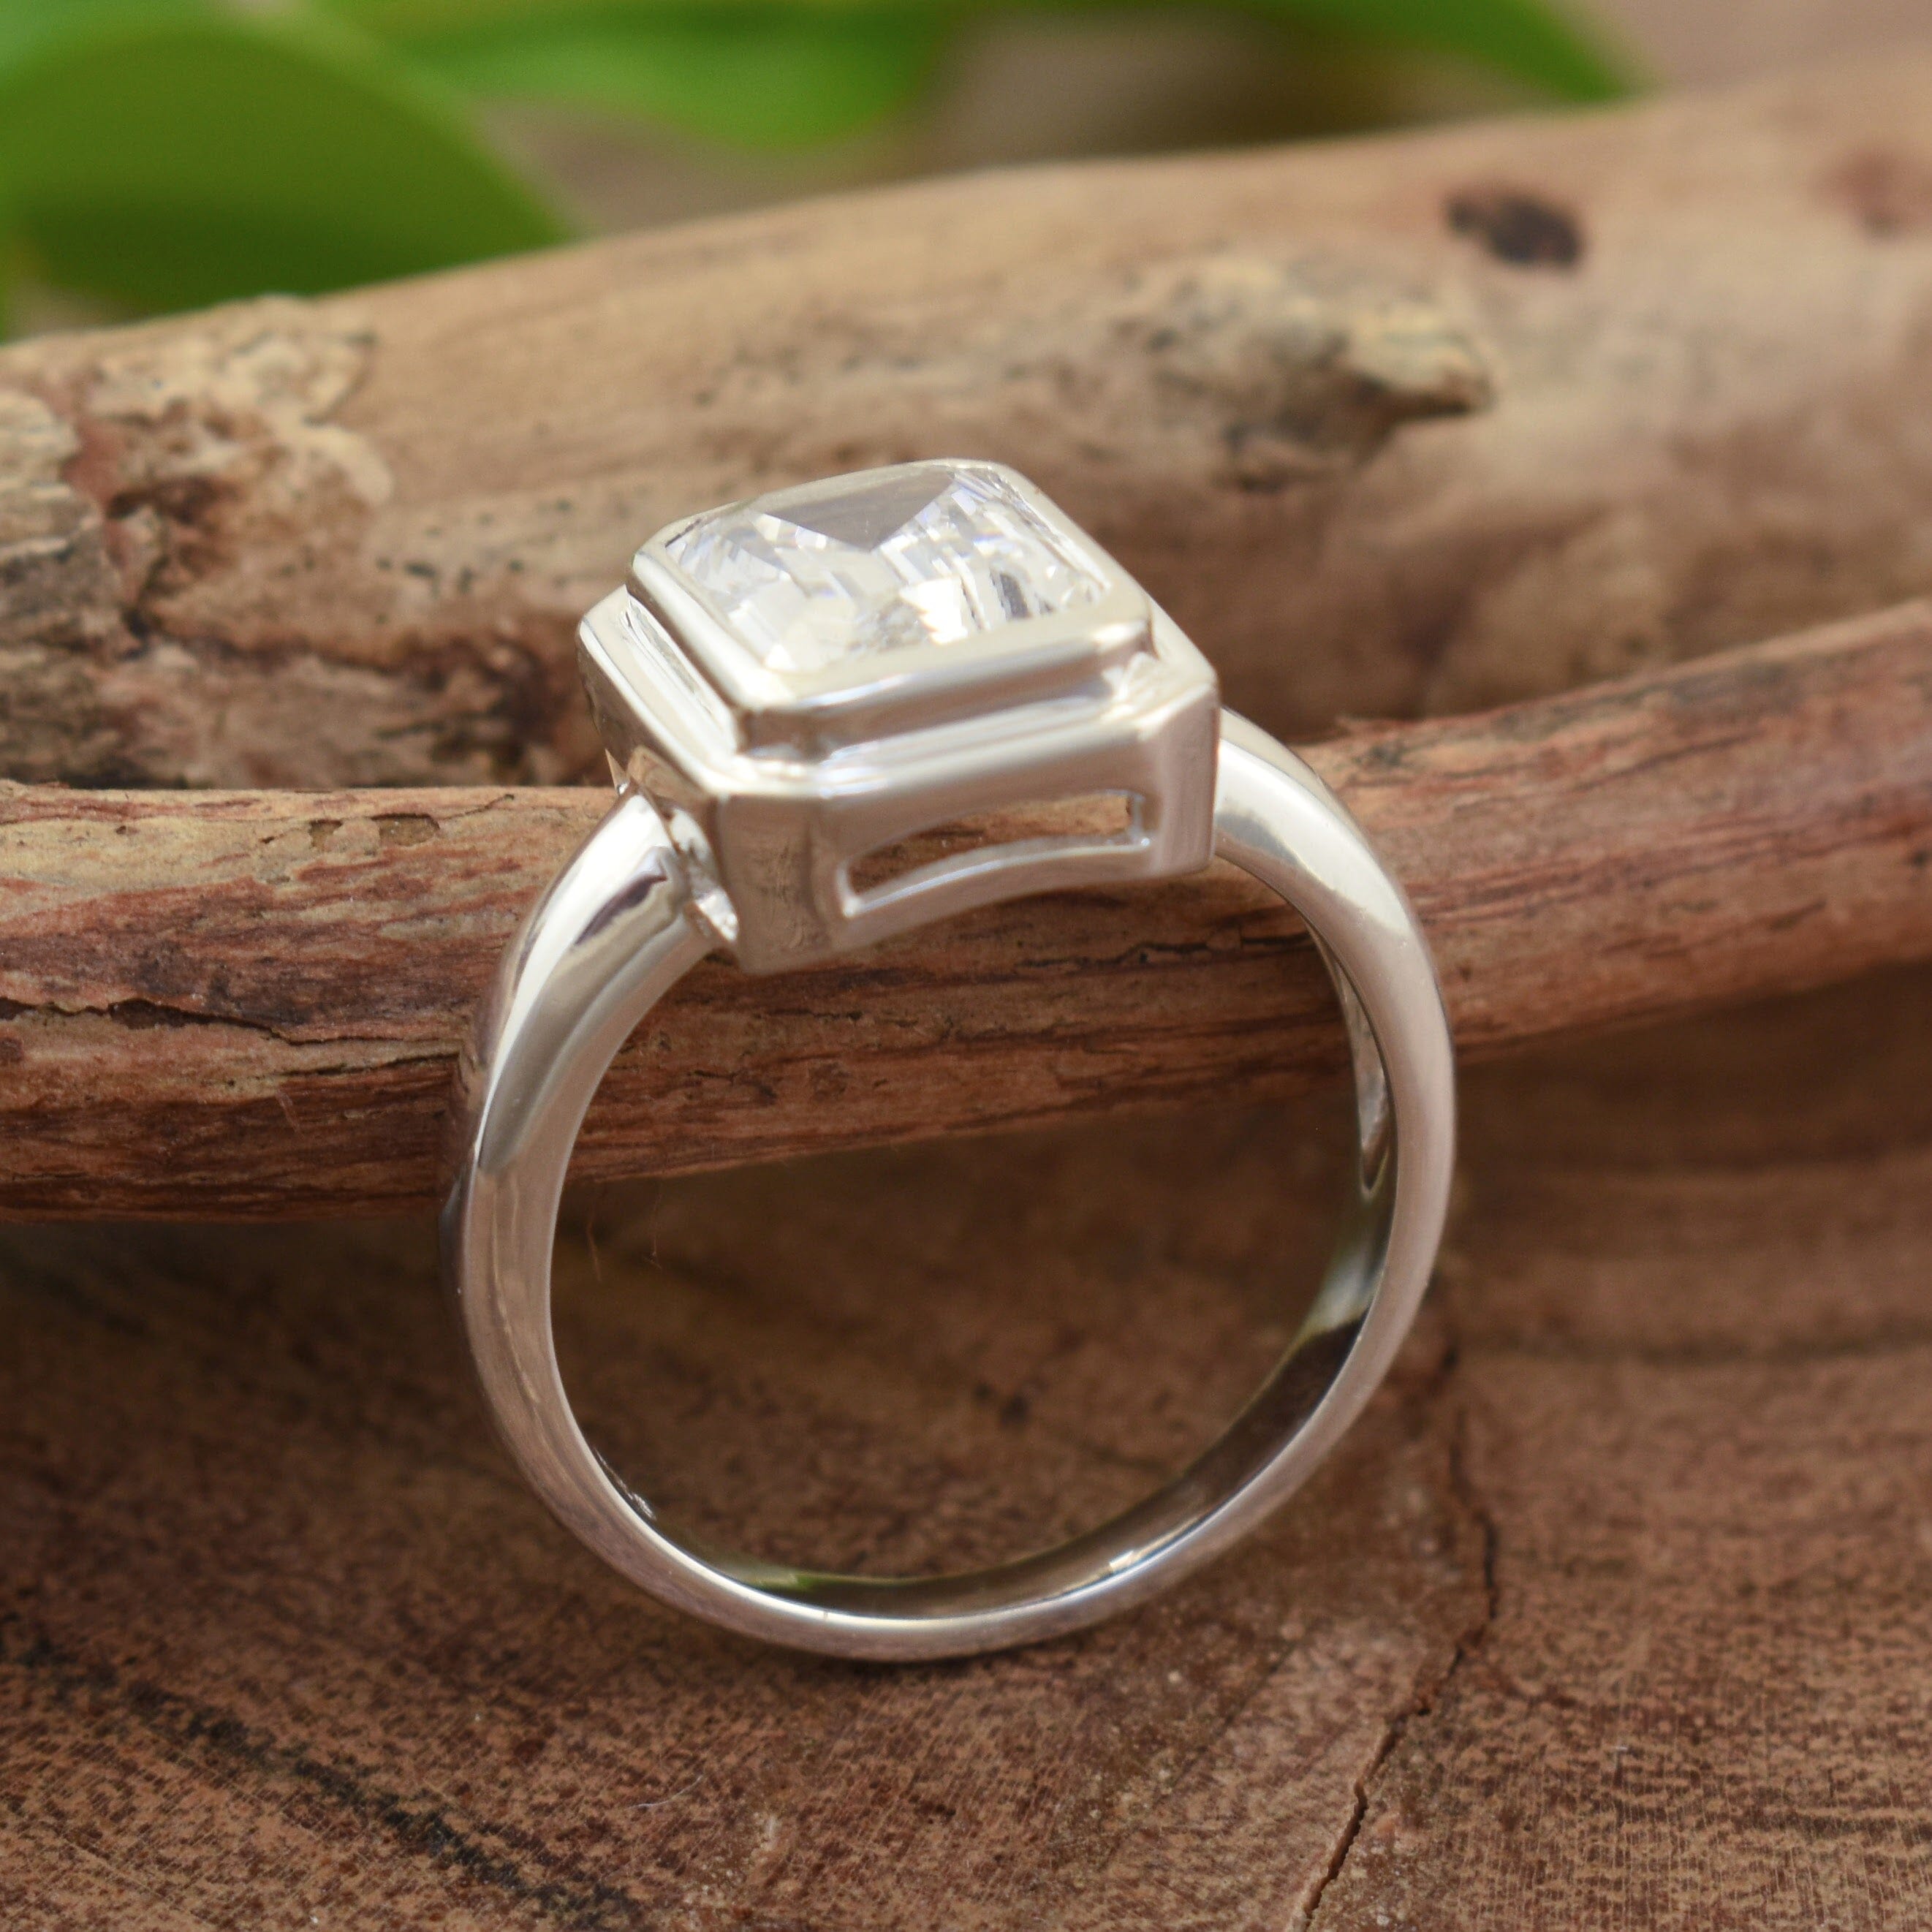 Rectangular sterling silver ring with clear cz stone